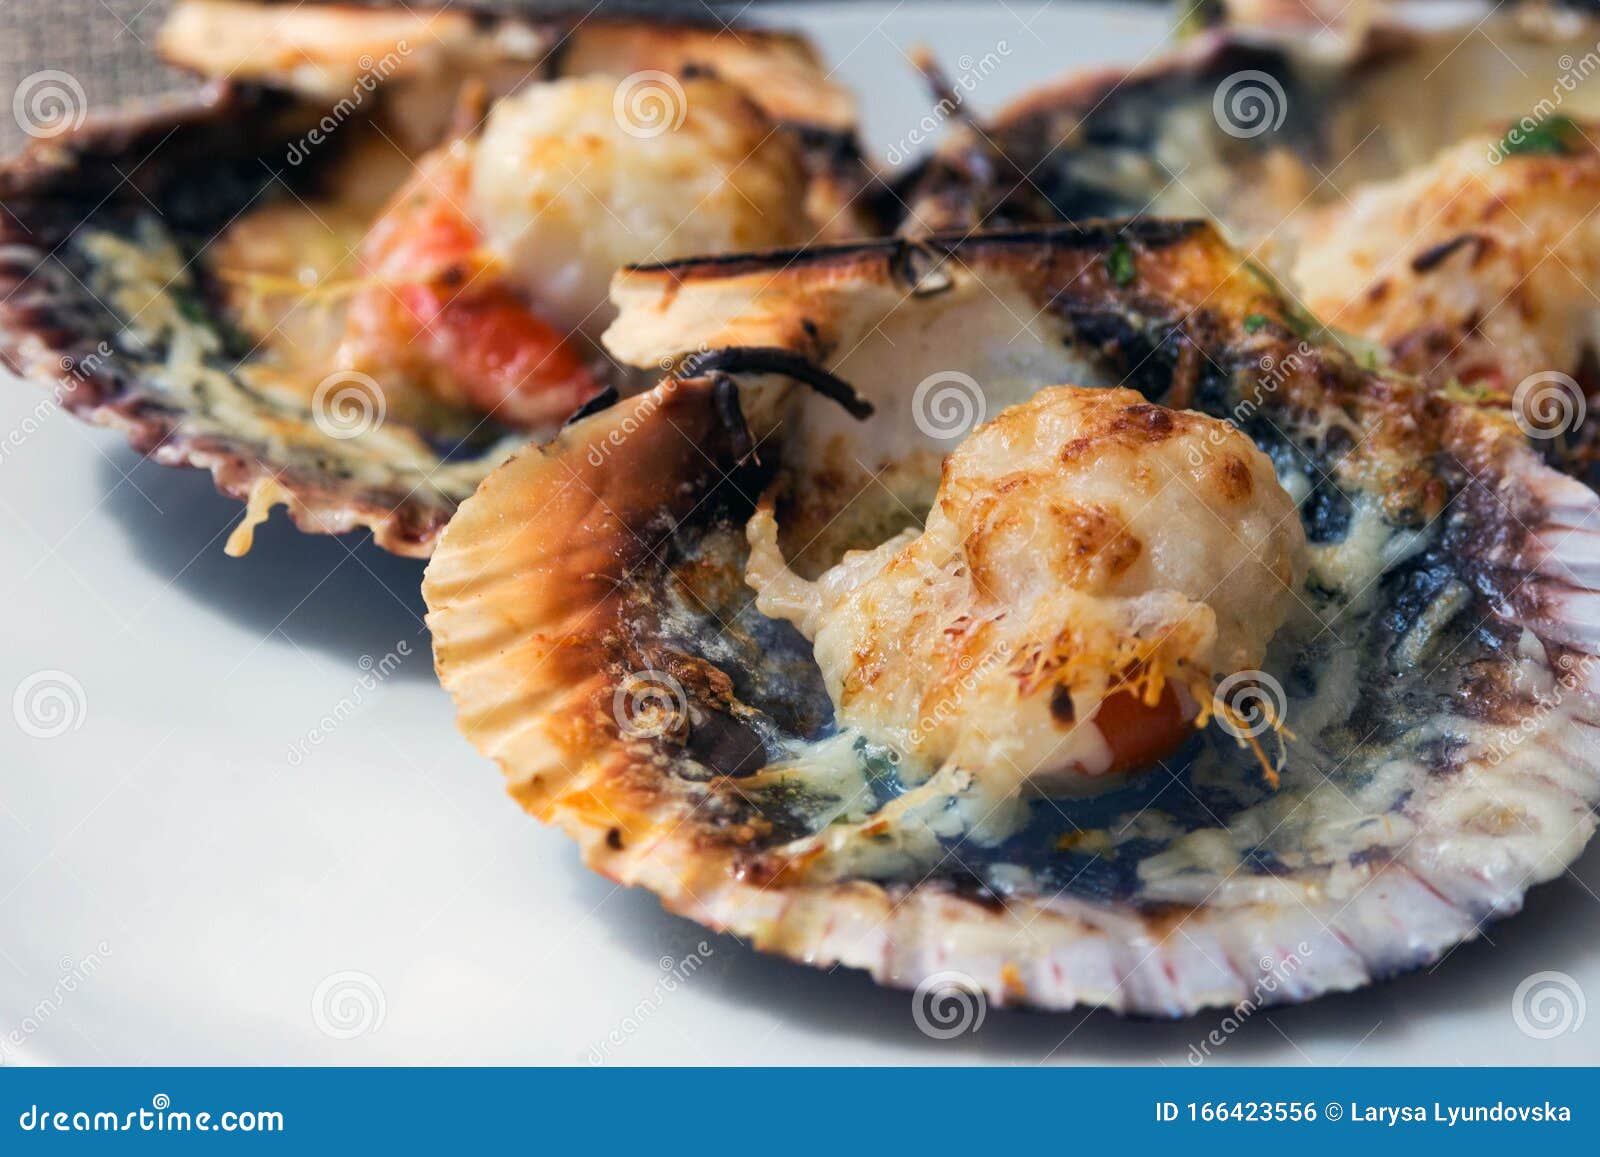 Baked Scallops With Cheese And Spicy Sauce Delicate Is A Real Pleasure Romantic Dinner At A Spanish Fish Restaurant Stock Photo Image Of Cooked Cockleshell 166423556,How To Bbq Ribs